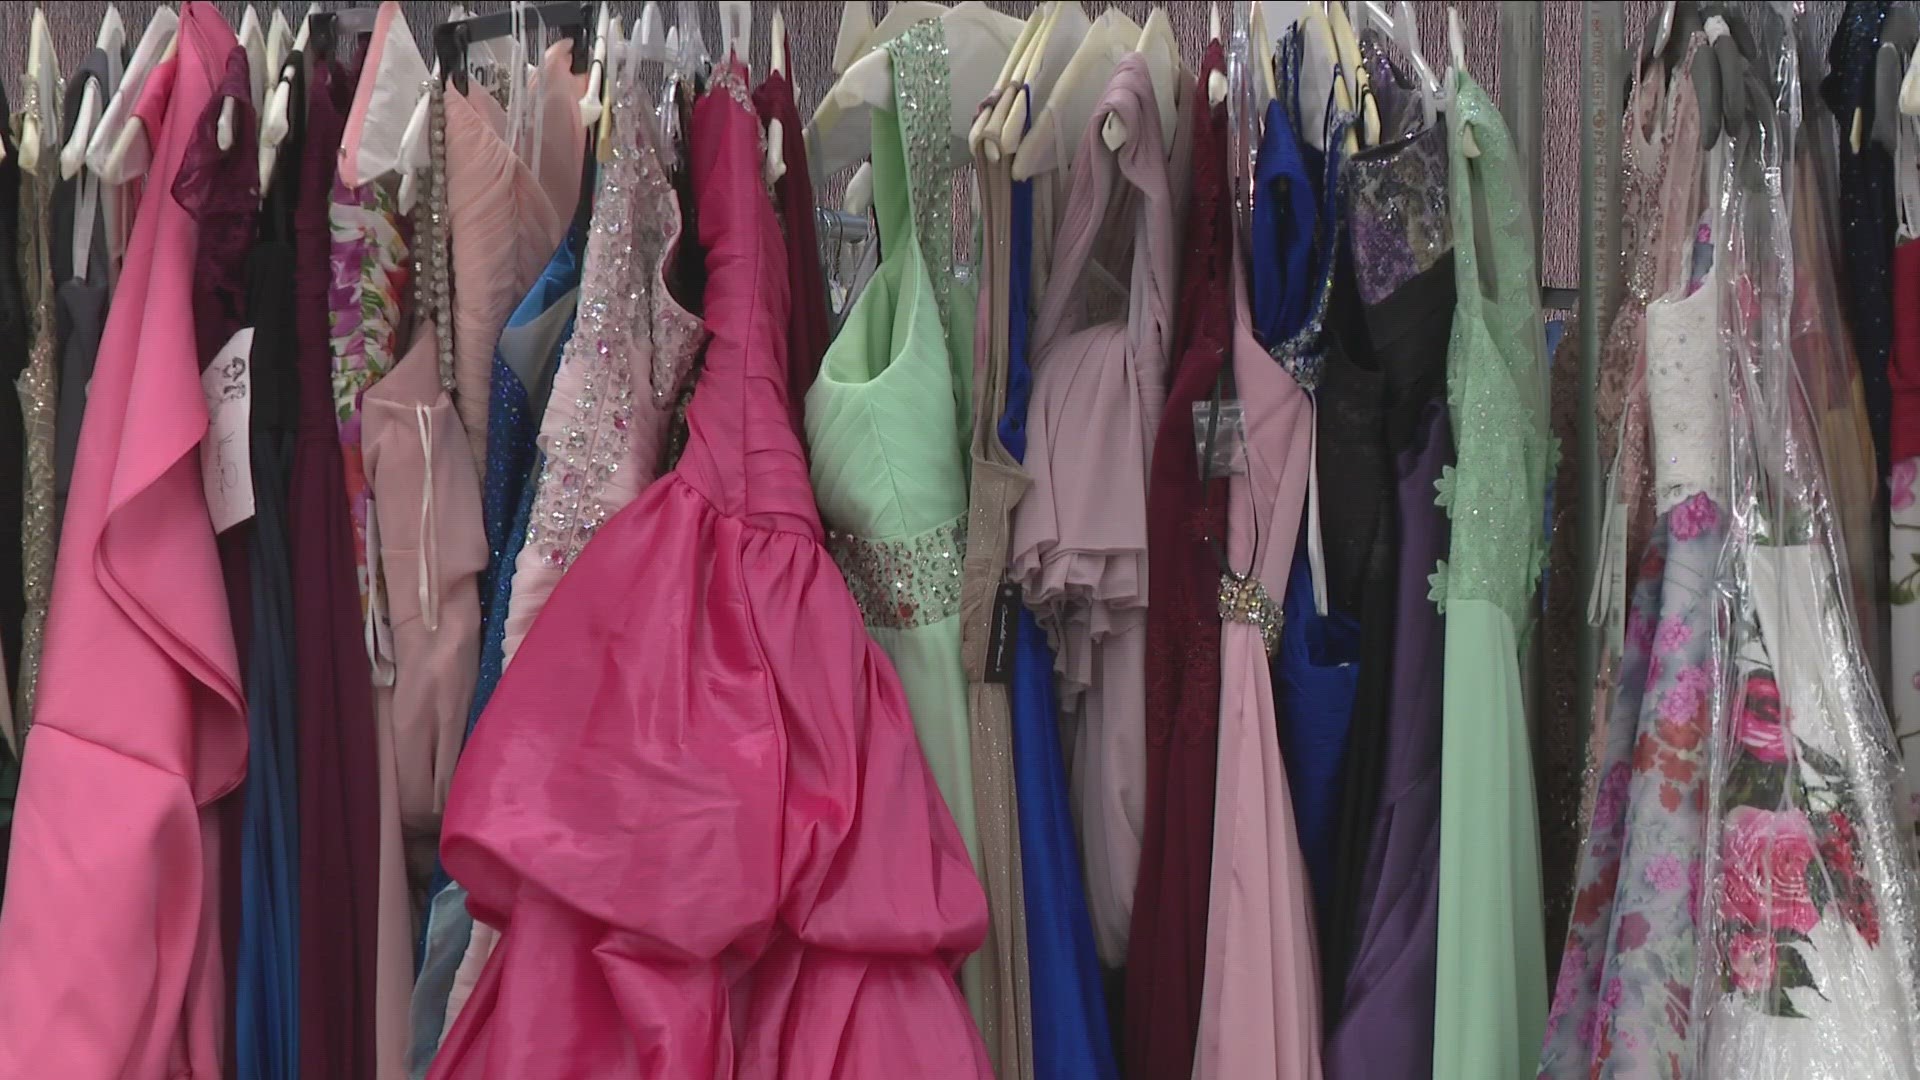 STUDENTS WILL BE ABLE TO CHOOSE FROM THOUSANDS OF DRESSES AND OTHER ACCESSORIES... FOR FREE.